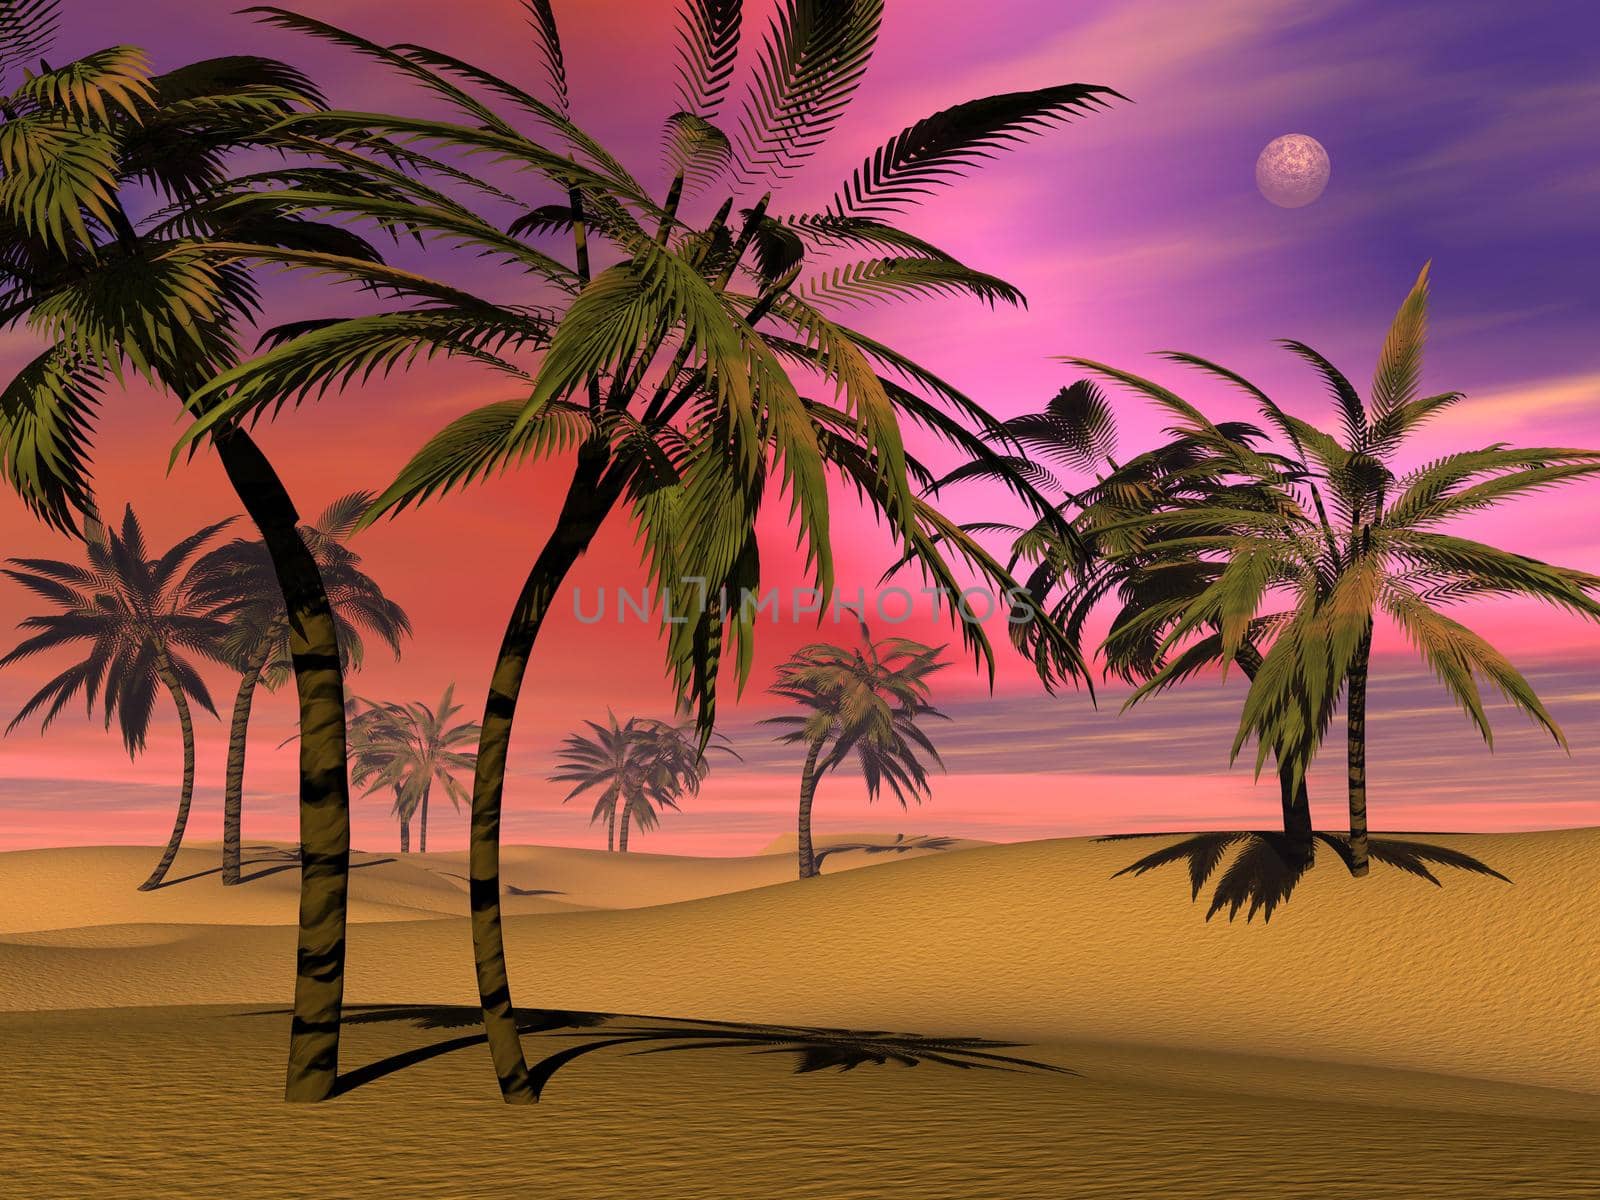 Many palm trees in the desert sand by colorful sunset with full moon